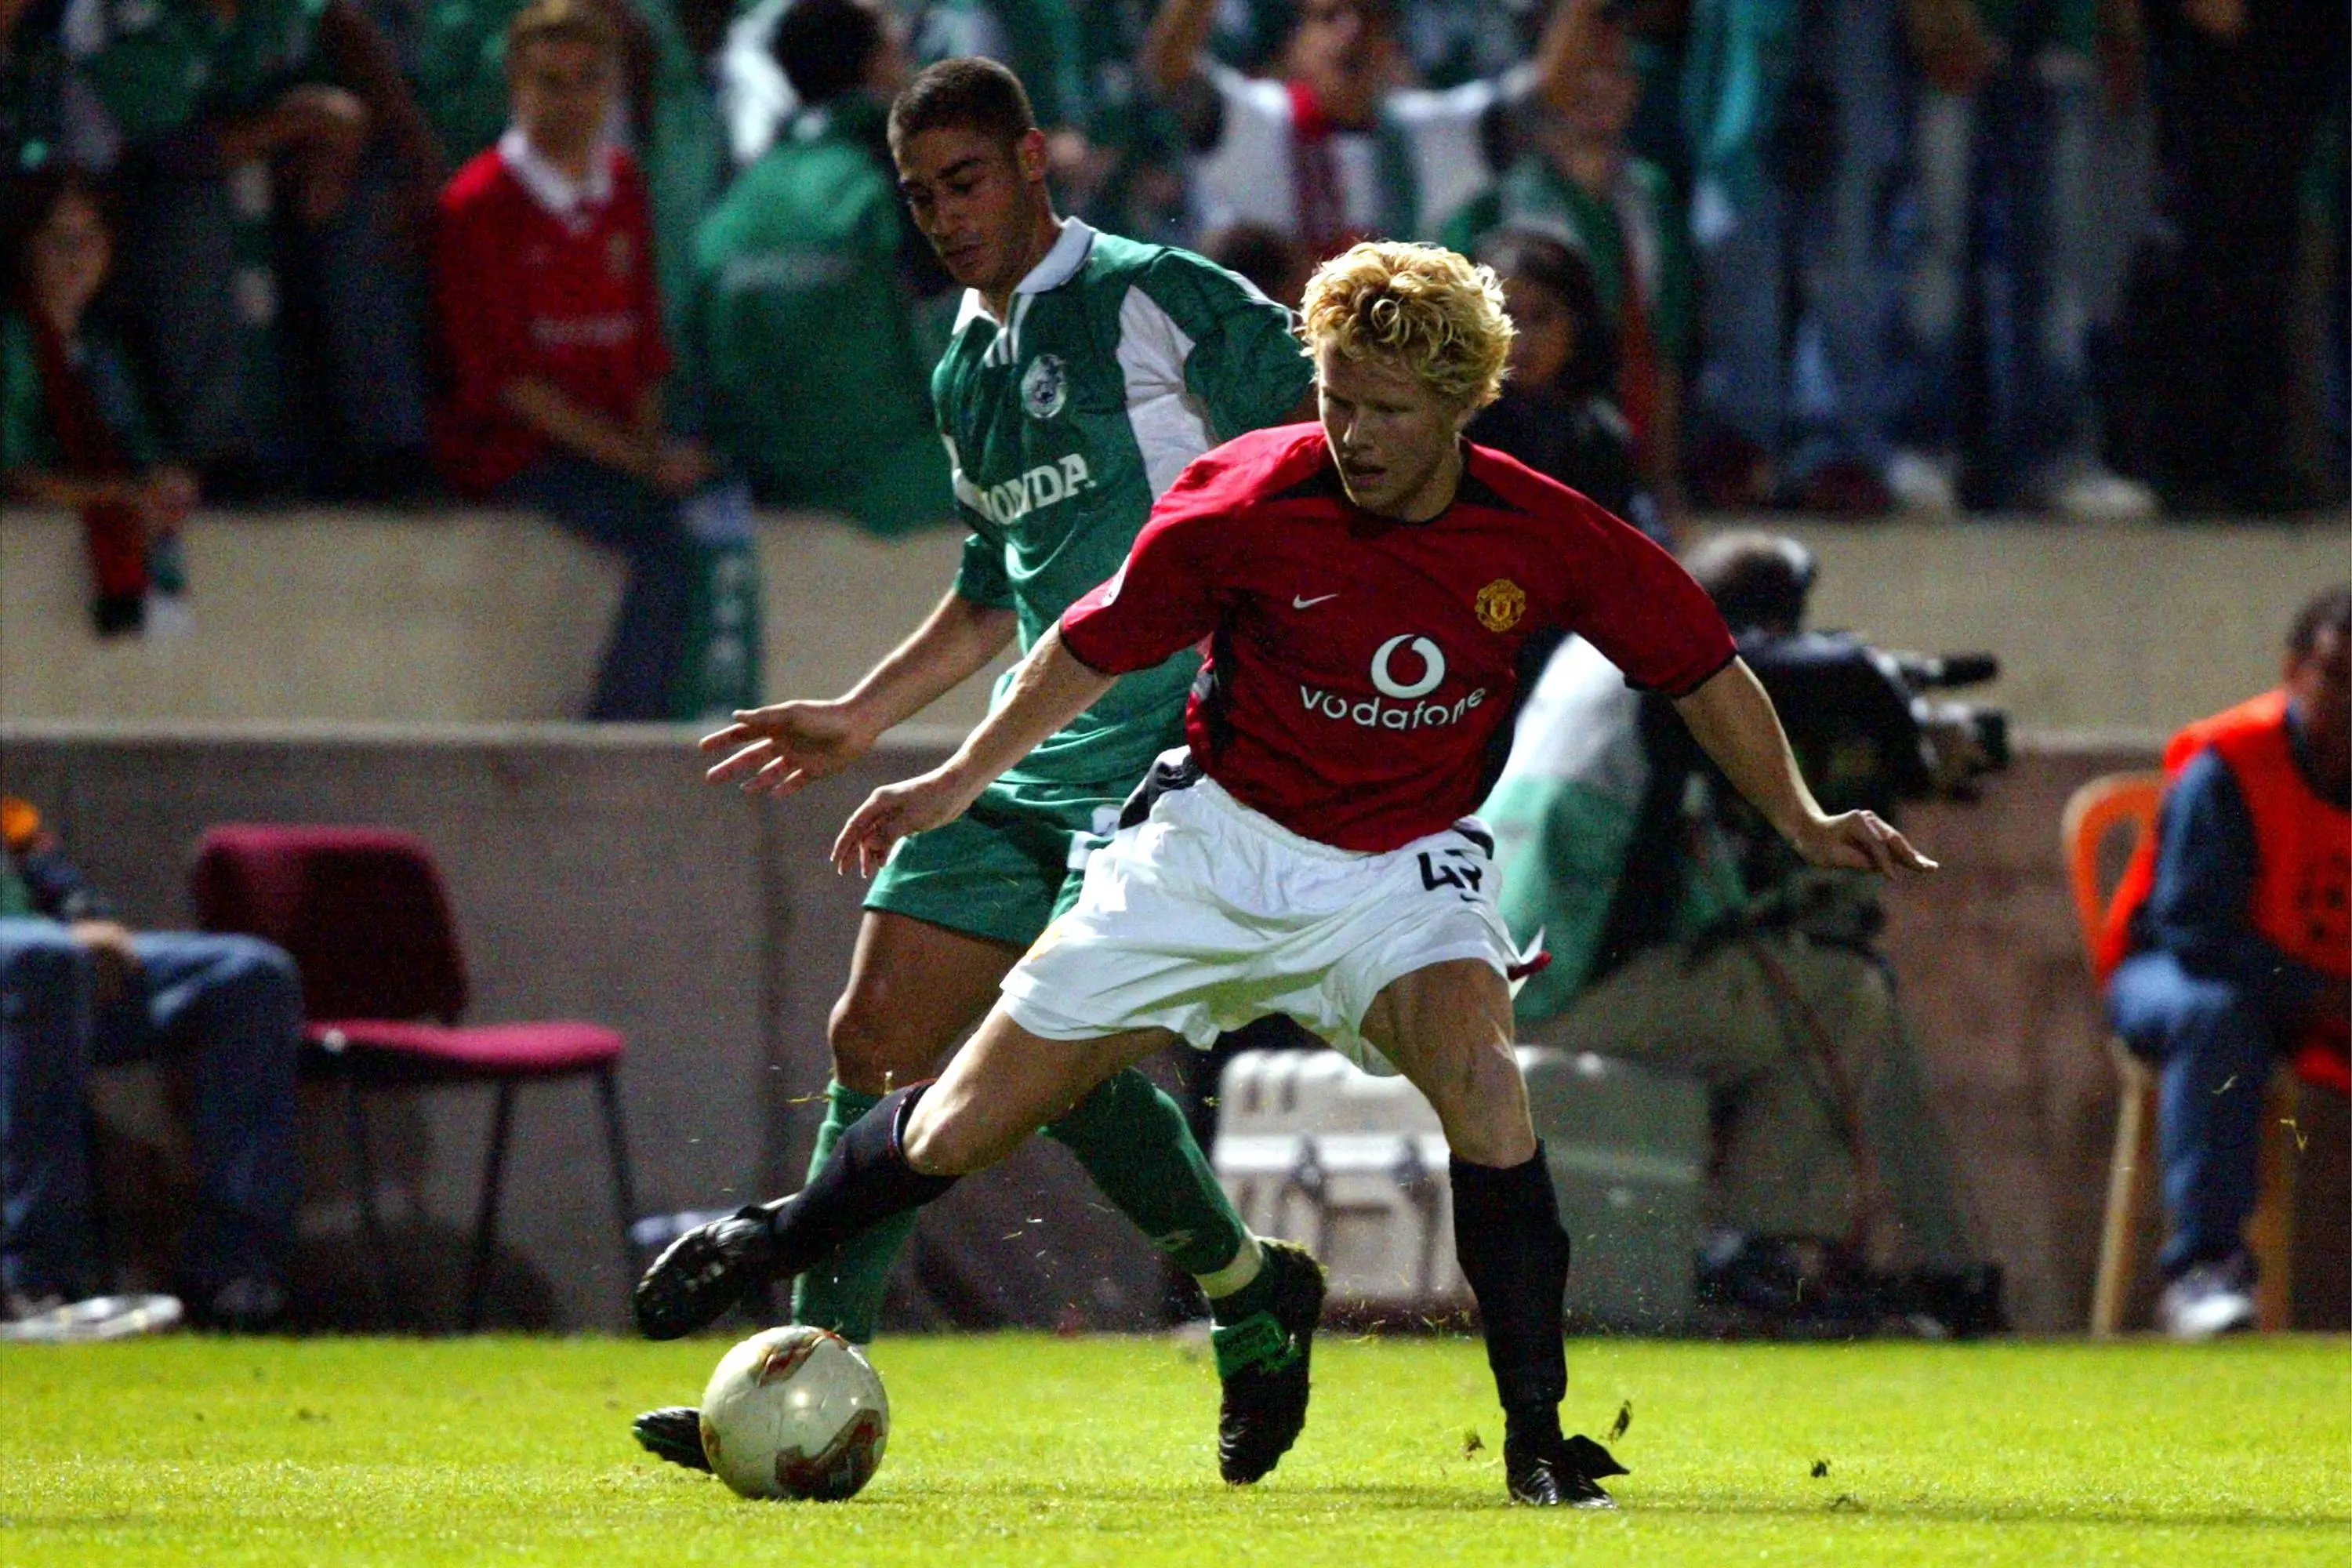 Timm playing for United in 2002. Image: PA Images